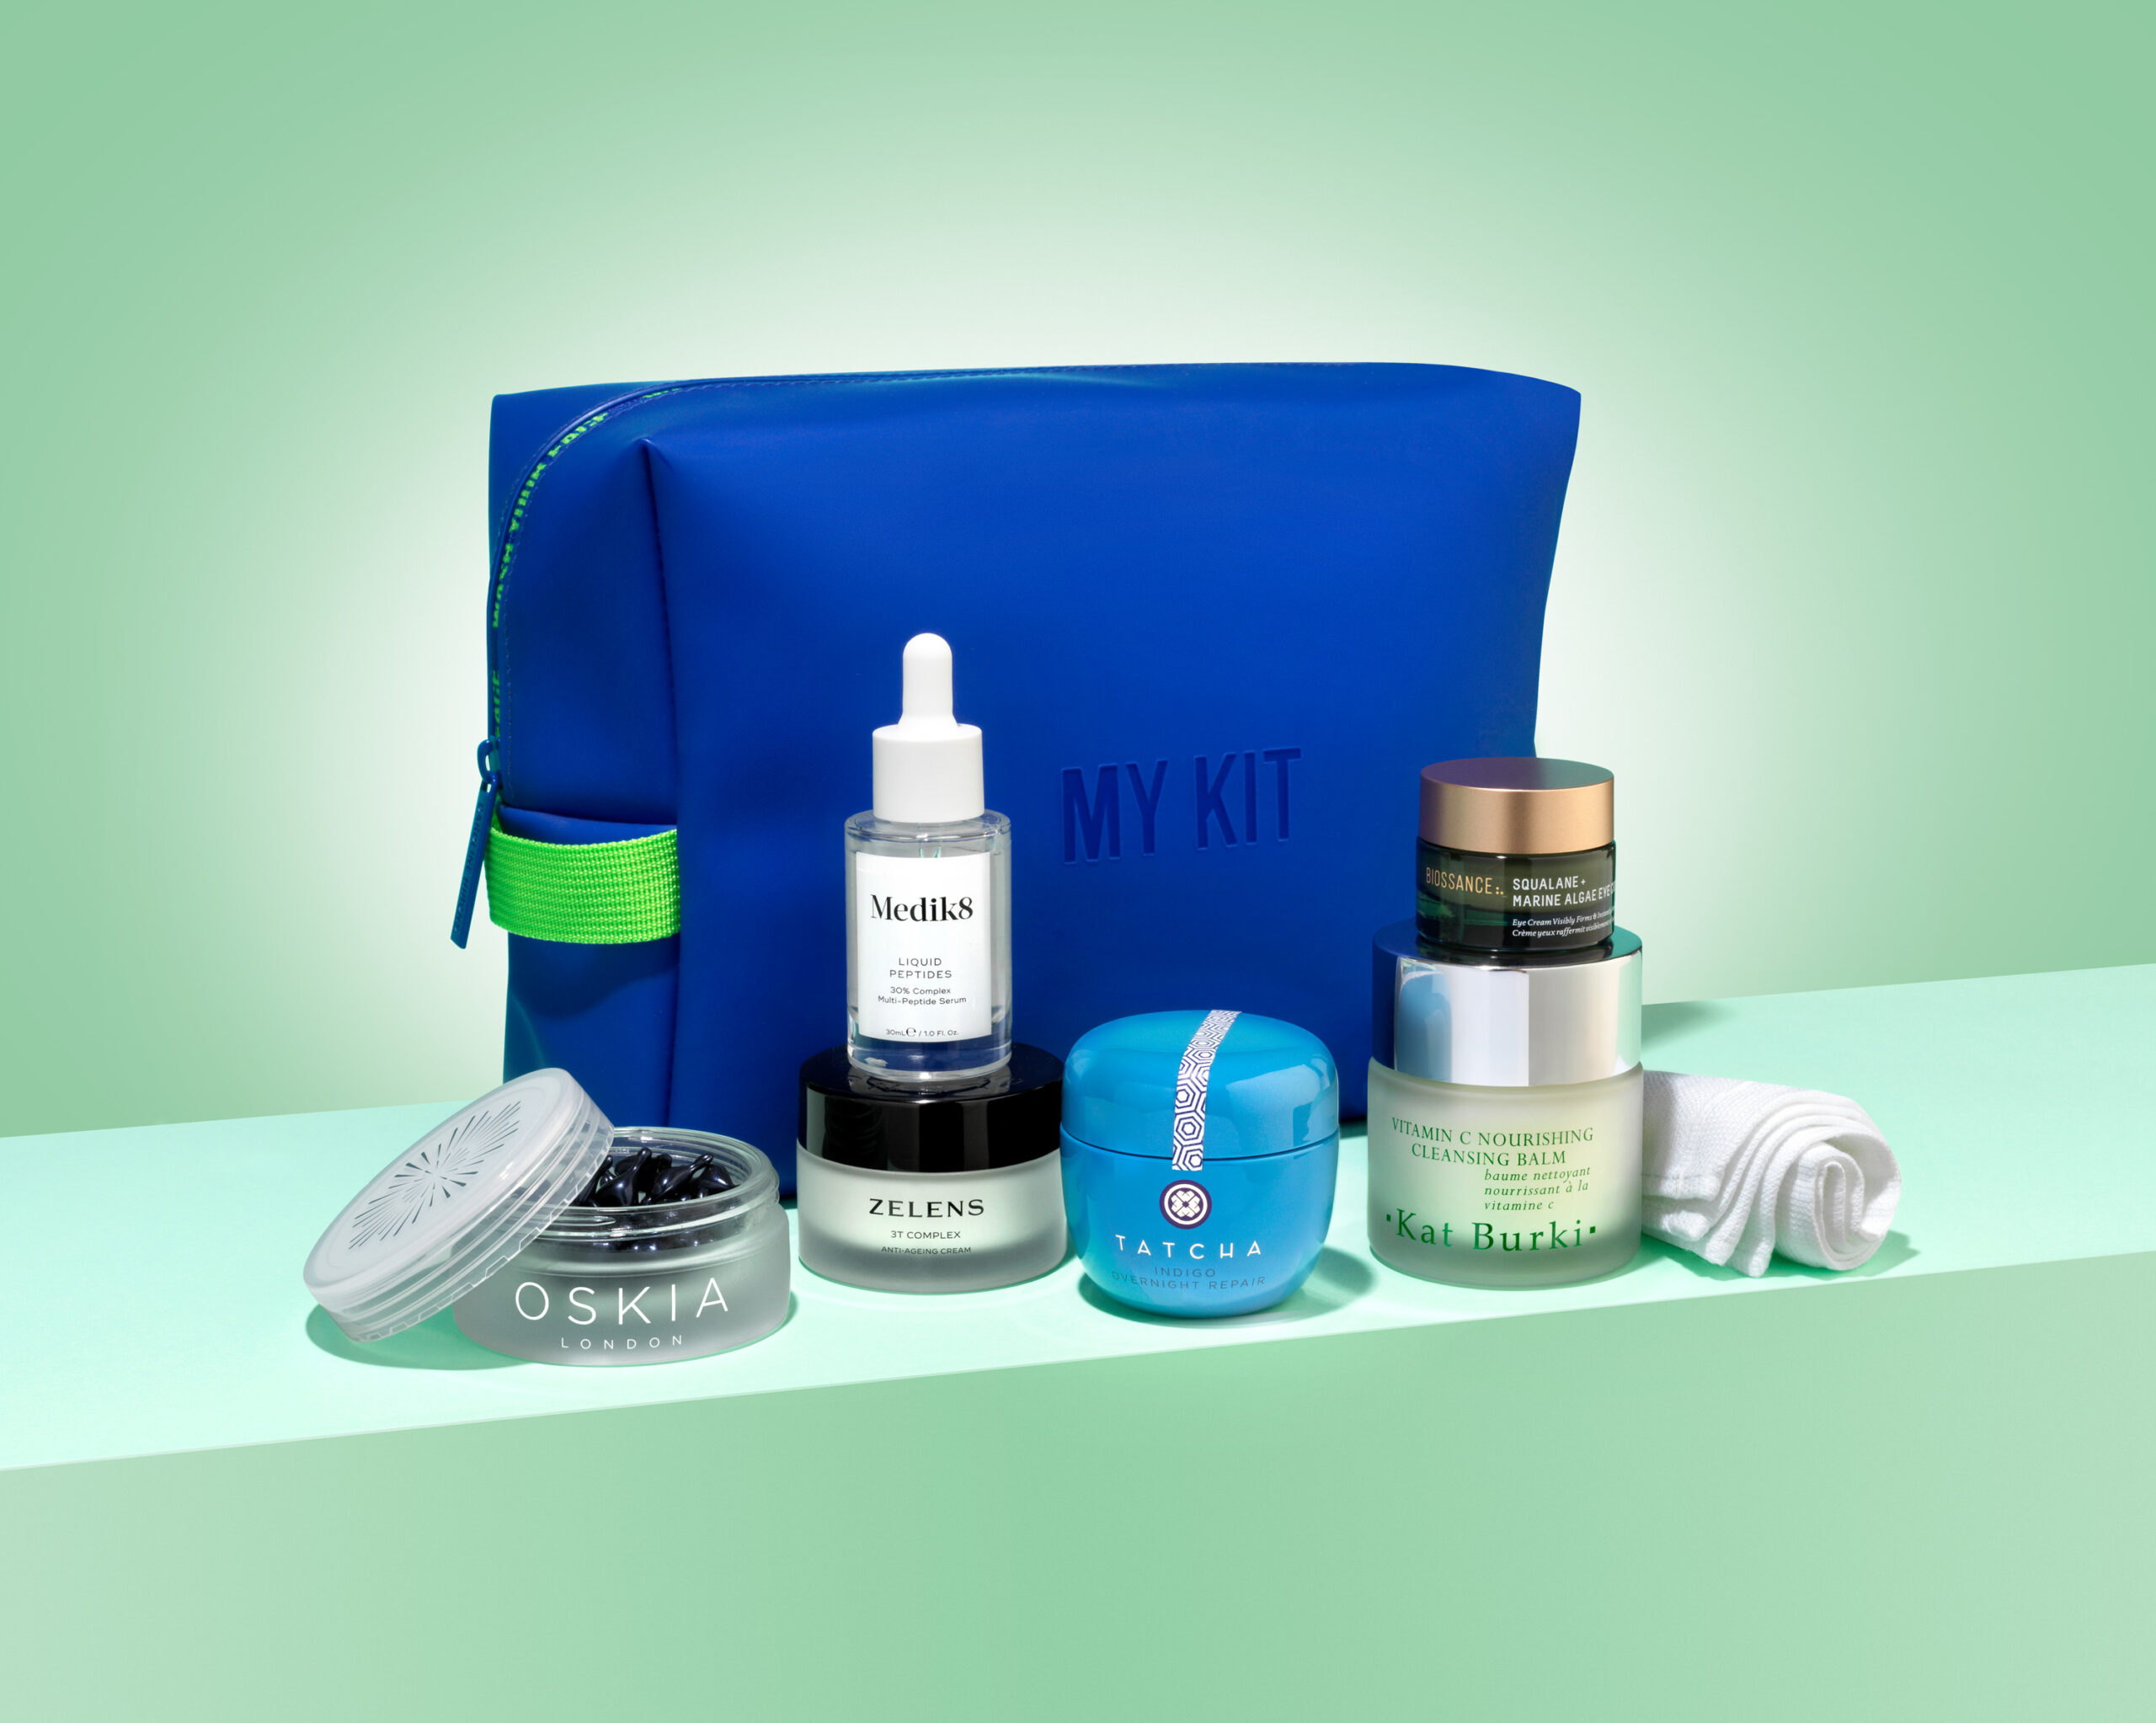 The Hit Refresh Kit Brand Offers